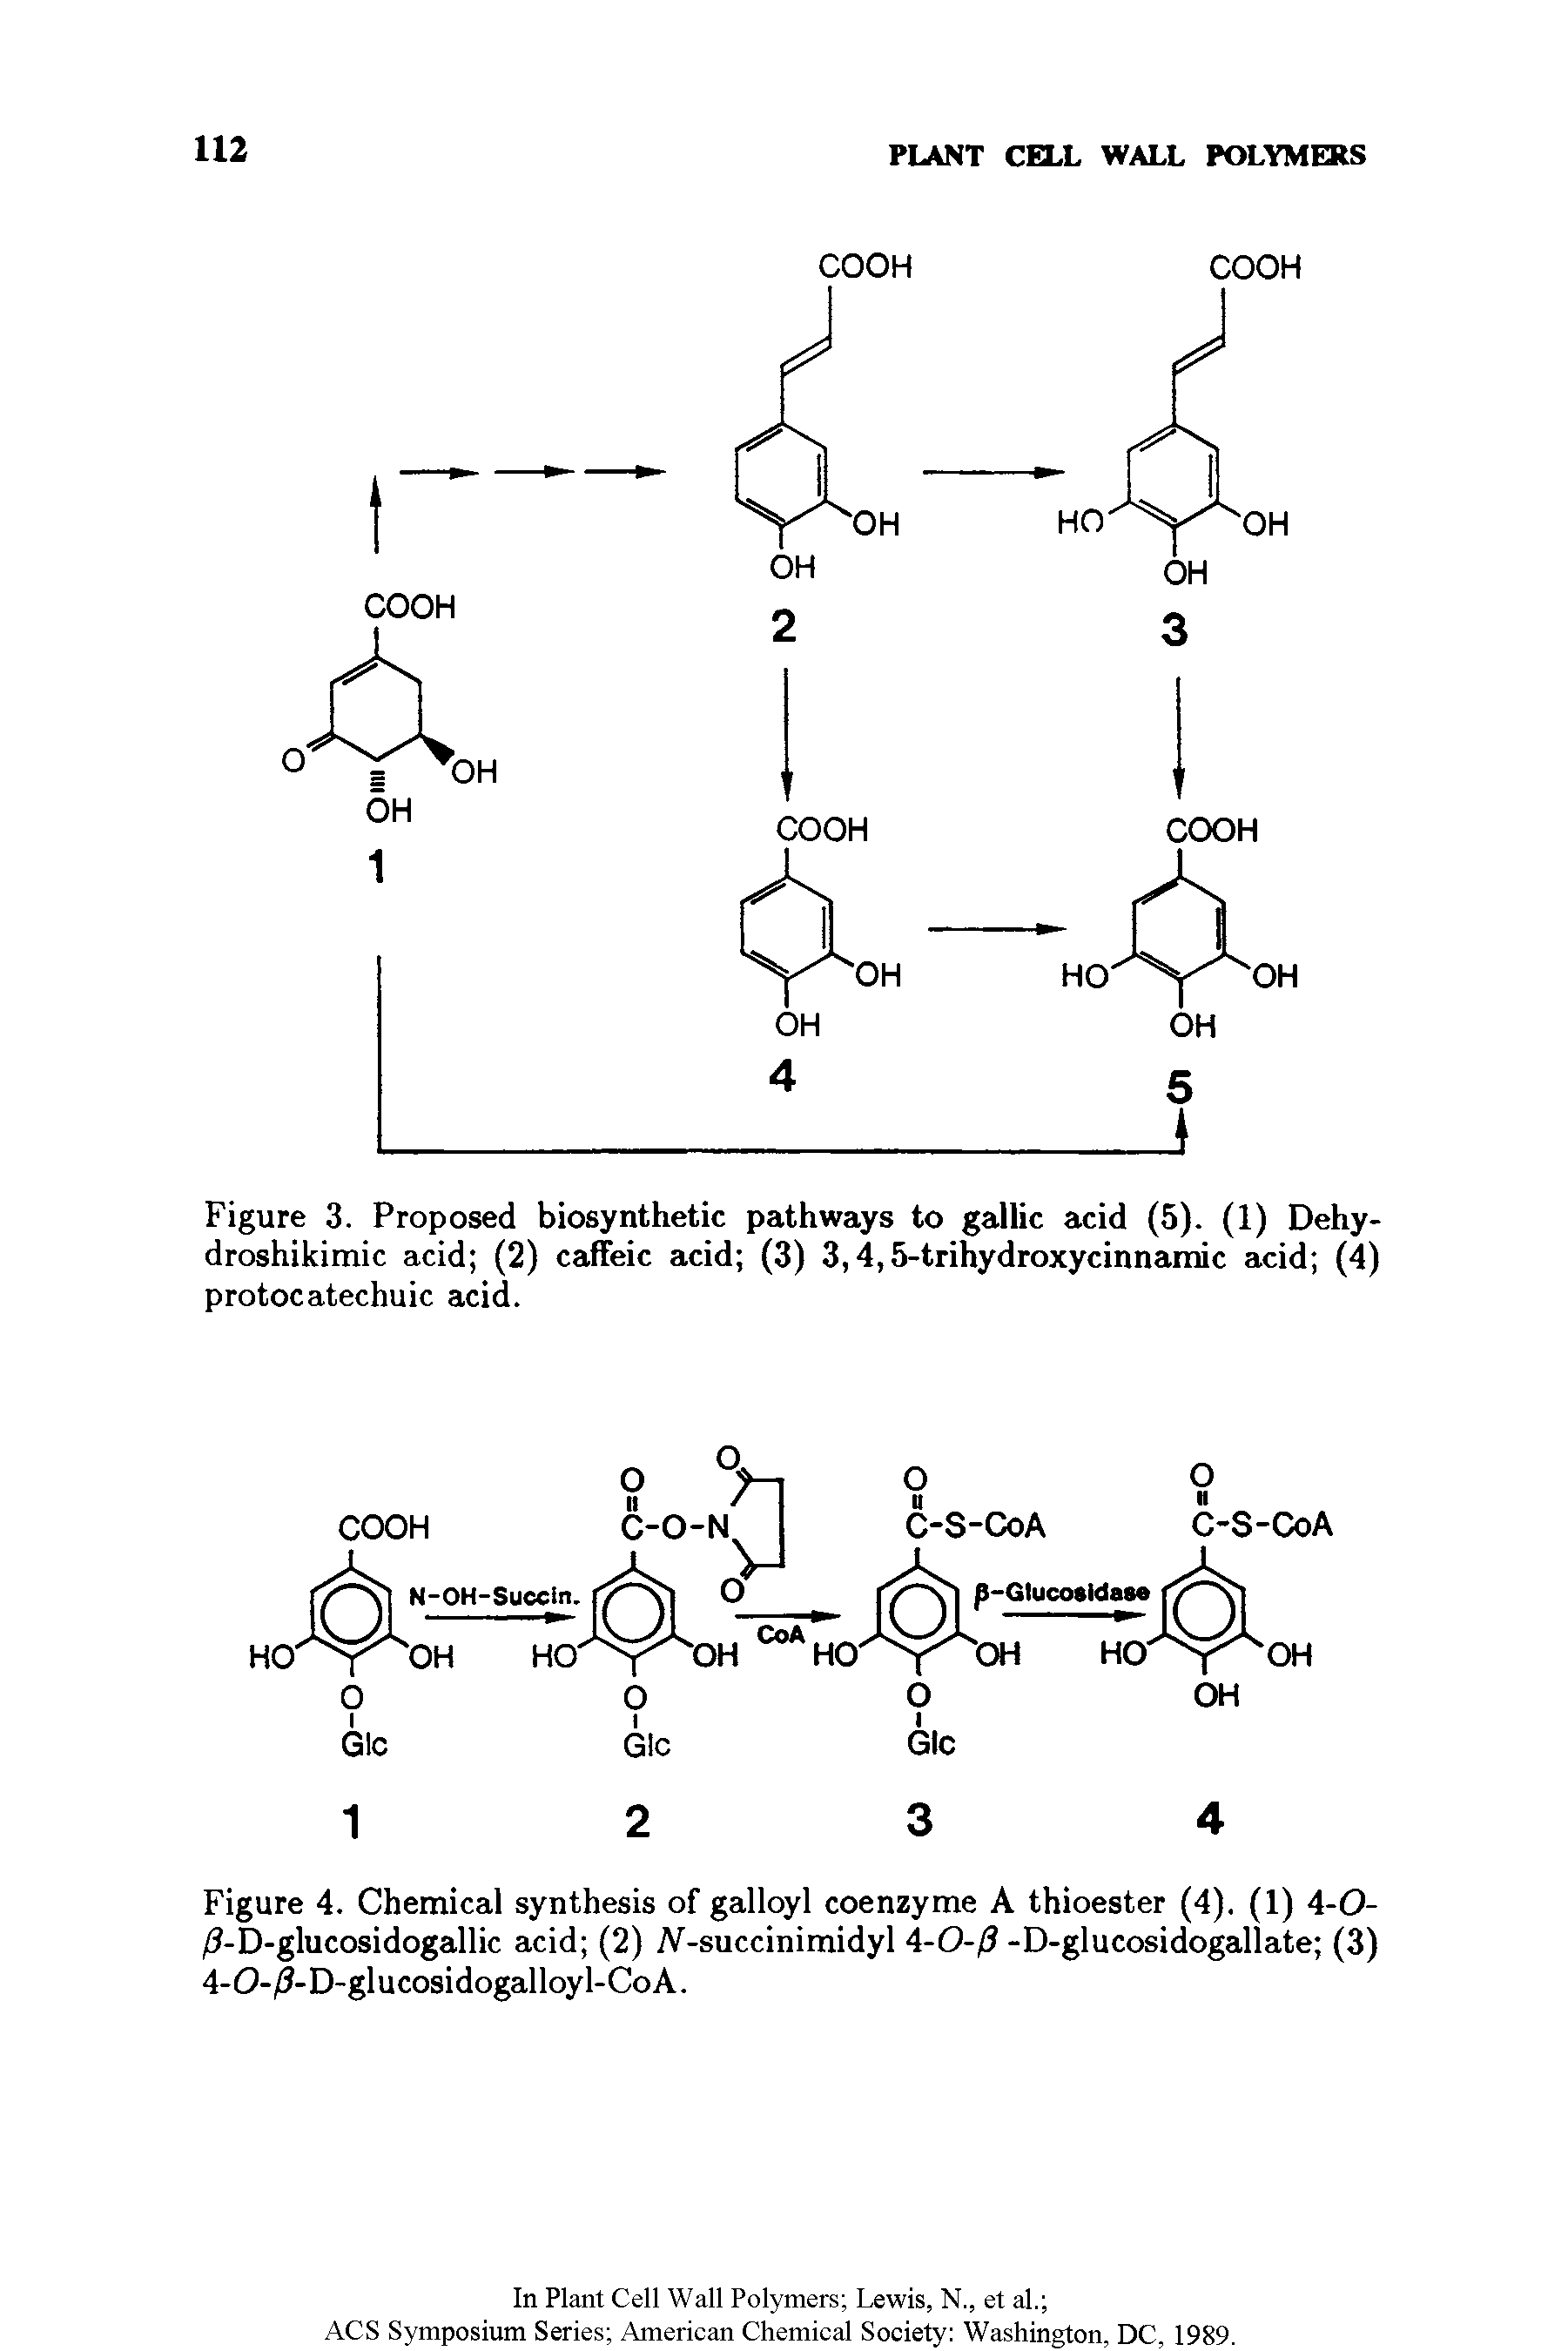 Figure 4. Chemical synthesis of galloyl coenzyme A thioester (4). (1) 4-0-/3-D-glucosidogallic acid (2) AT-succinimidyl 4-0-/3 -D-glucosidogallate (3)...